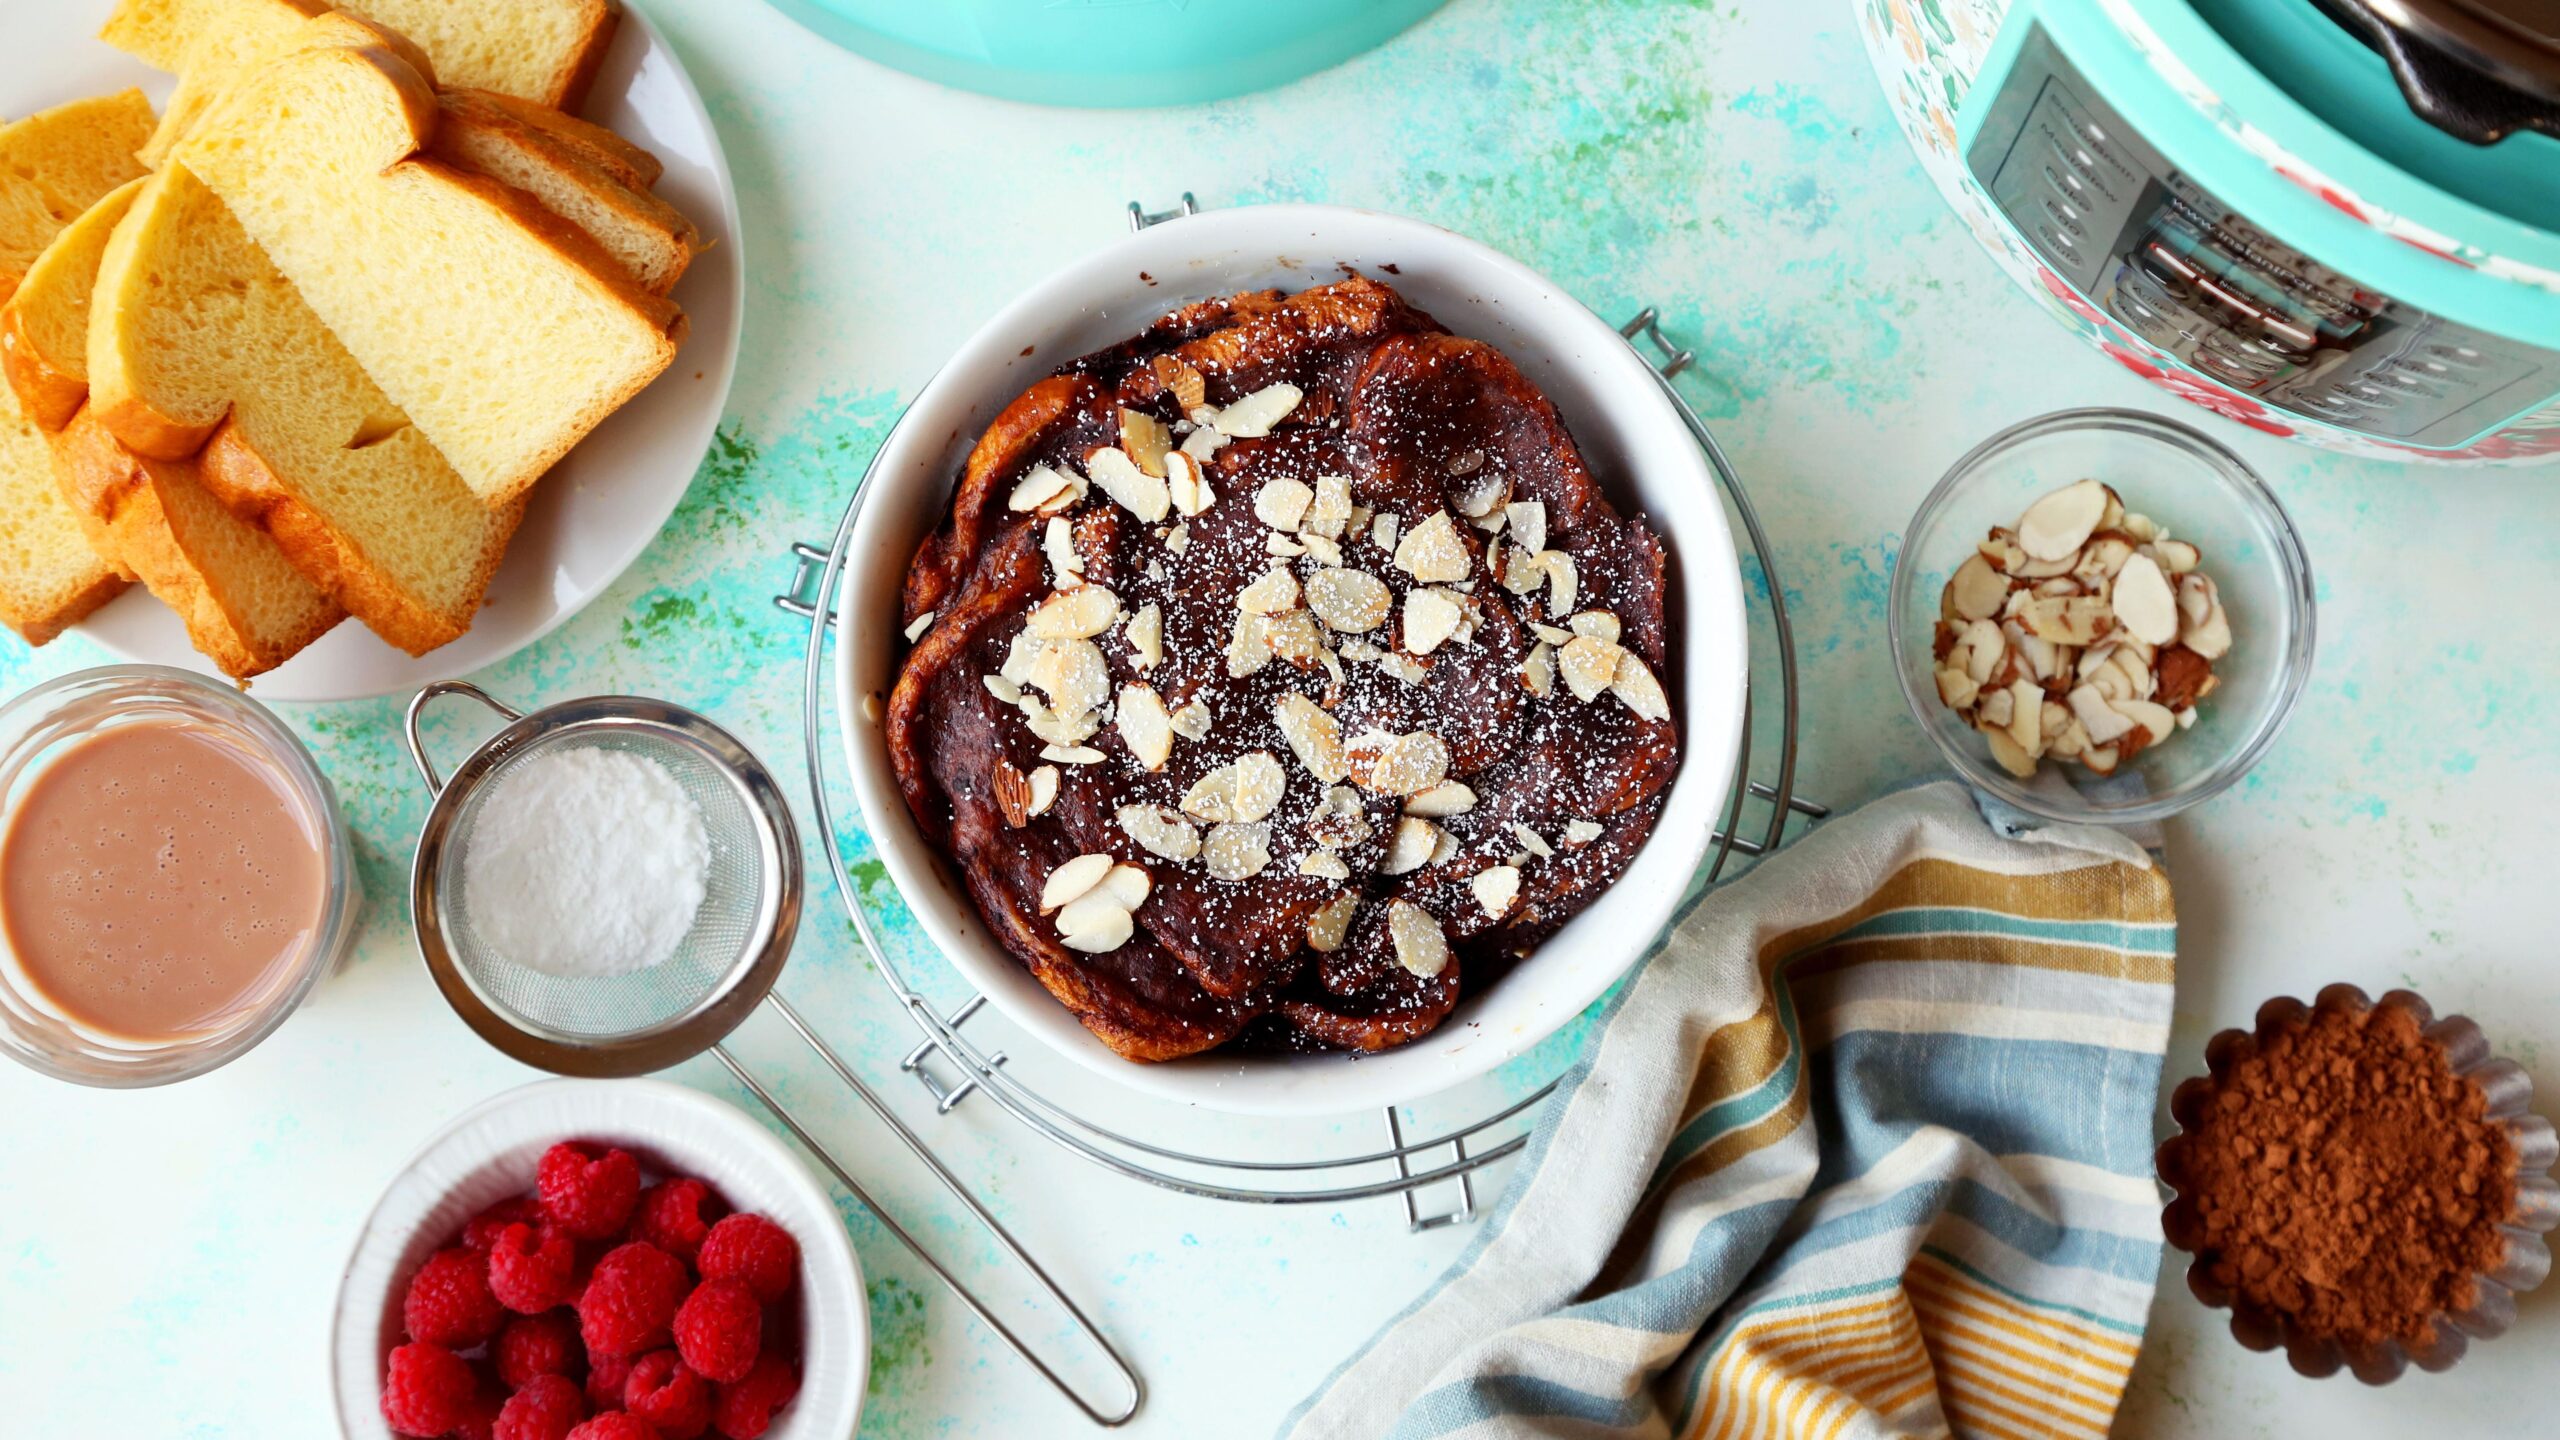  Satisfy your sweet tooth cravings with this Instant Pot Chocolate Almond French Toast Casserole!